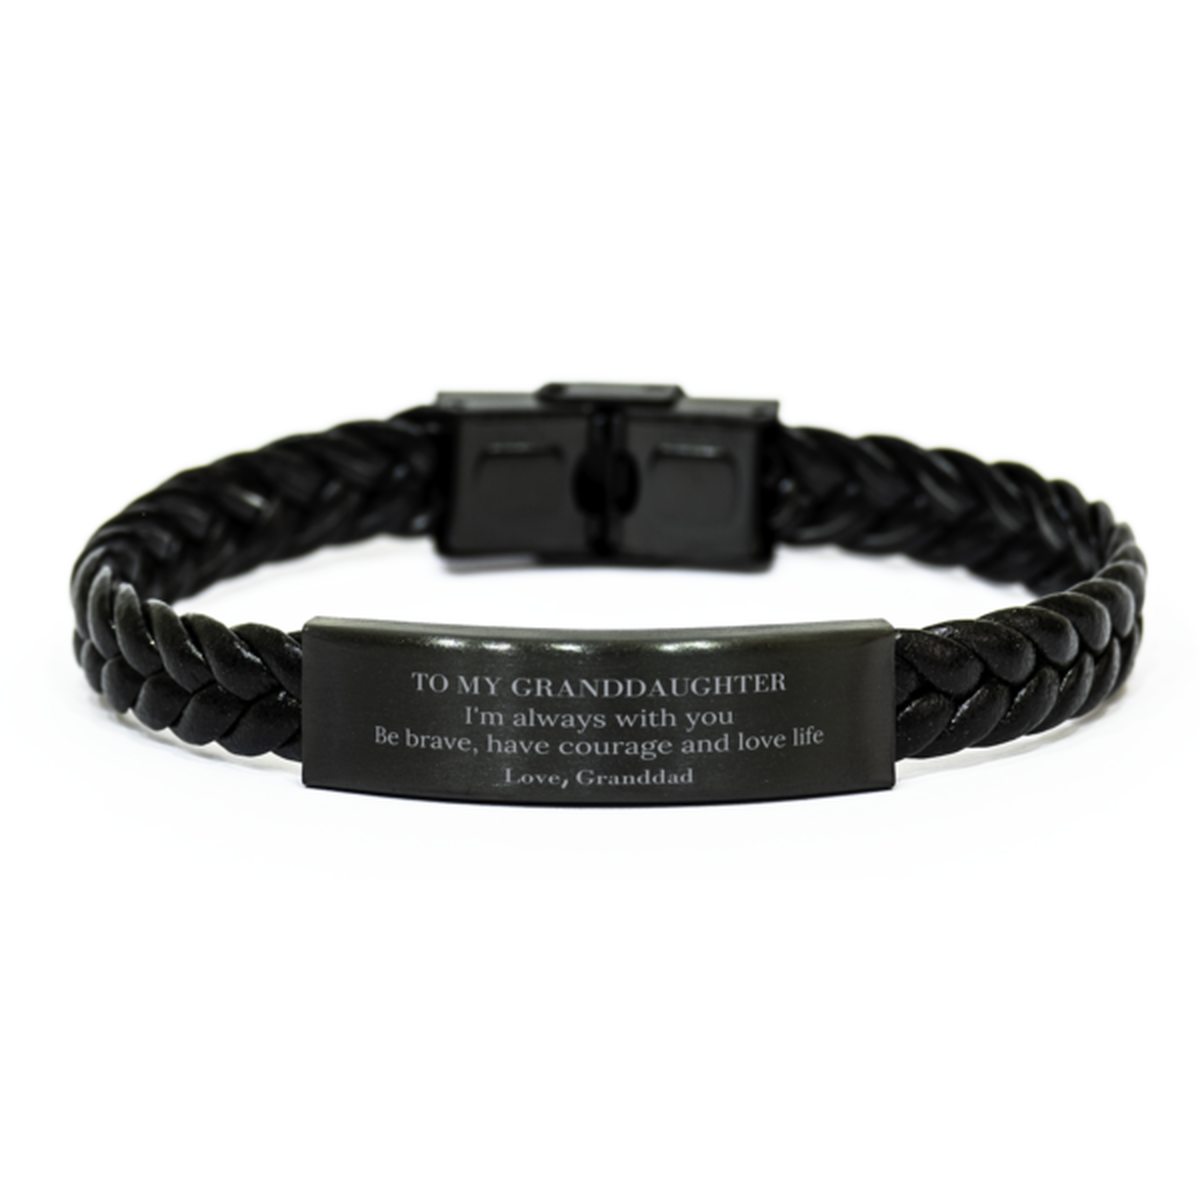 To My Granddaughter Gifts from Granddad, Unique Braided Leather Bracelet Inspirational Christmas Birthday Graduation Gifts for Granddaughter I'm always with you. Be brave, have courage and love life. Love, Granddad